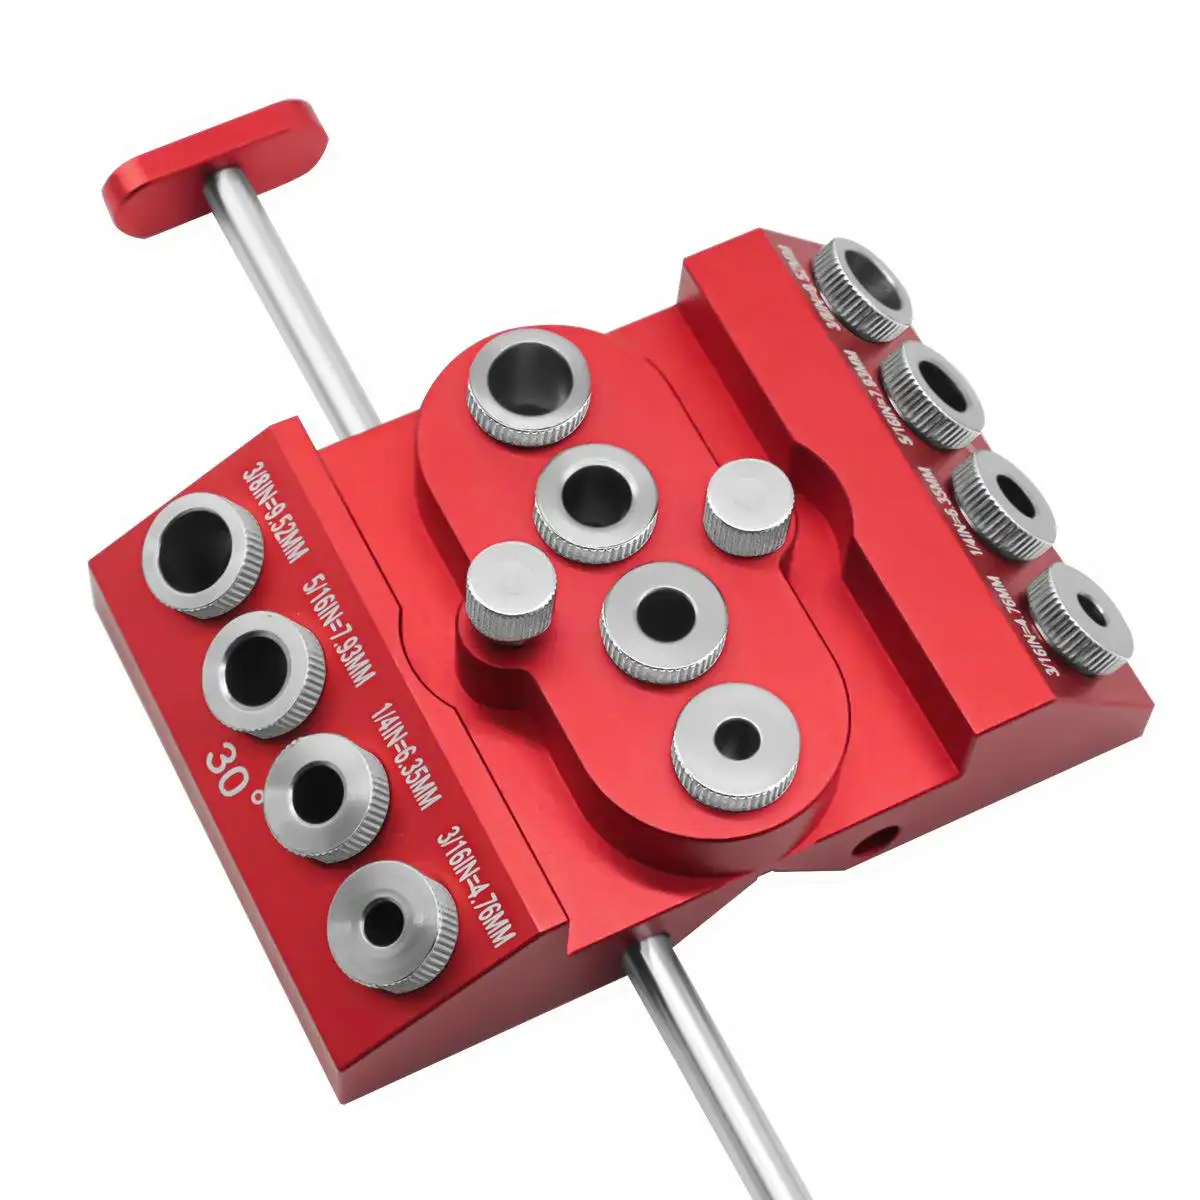 30/45/90 Degree Angle Drill Guide Jig for Cable Railing Lag Screw Kit Wood Post Drilling Degree Angle and Straight Holes